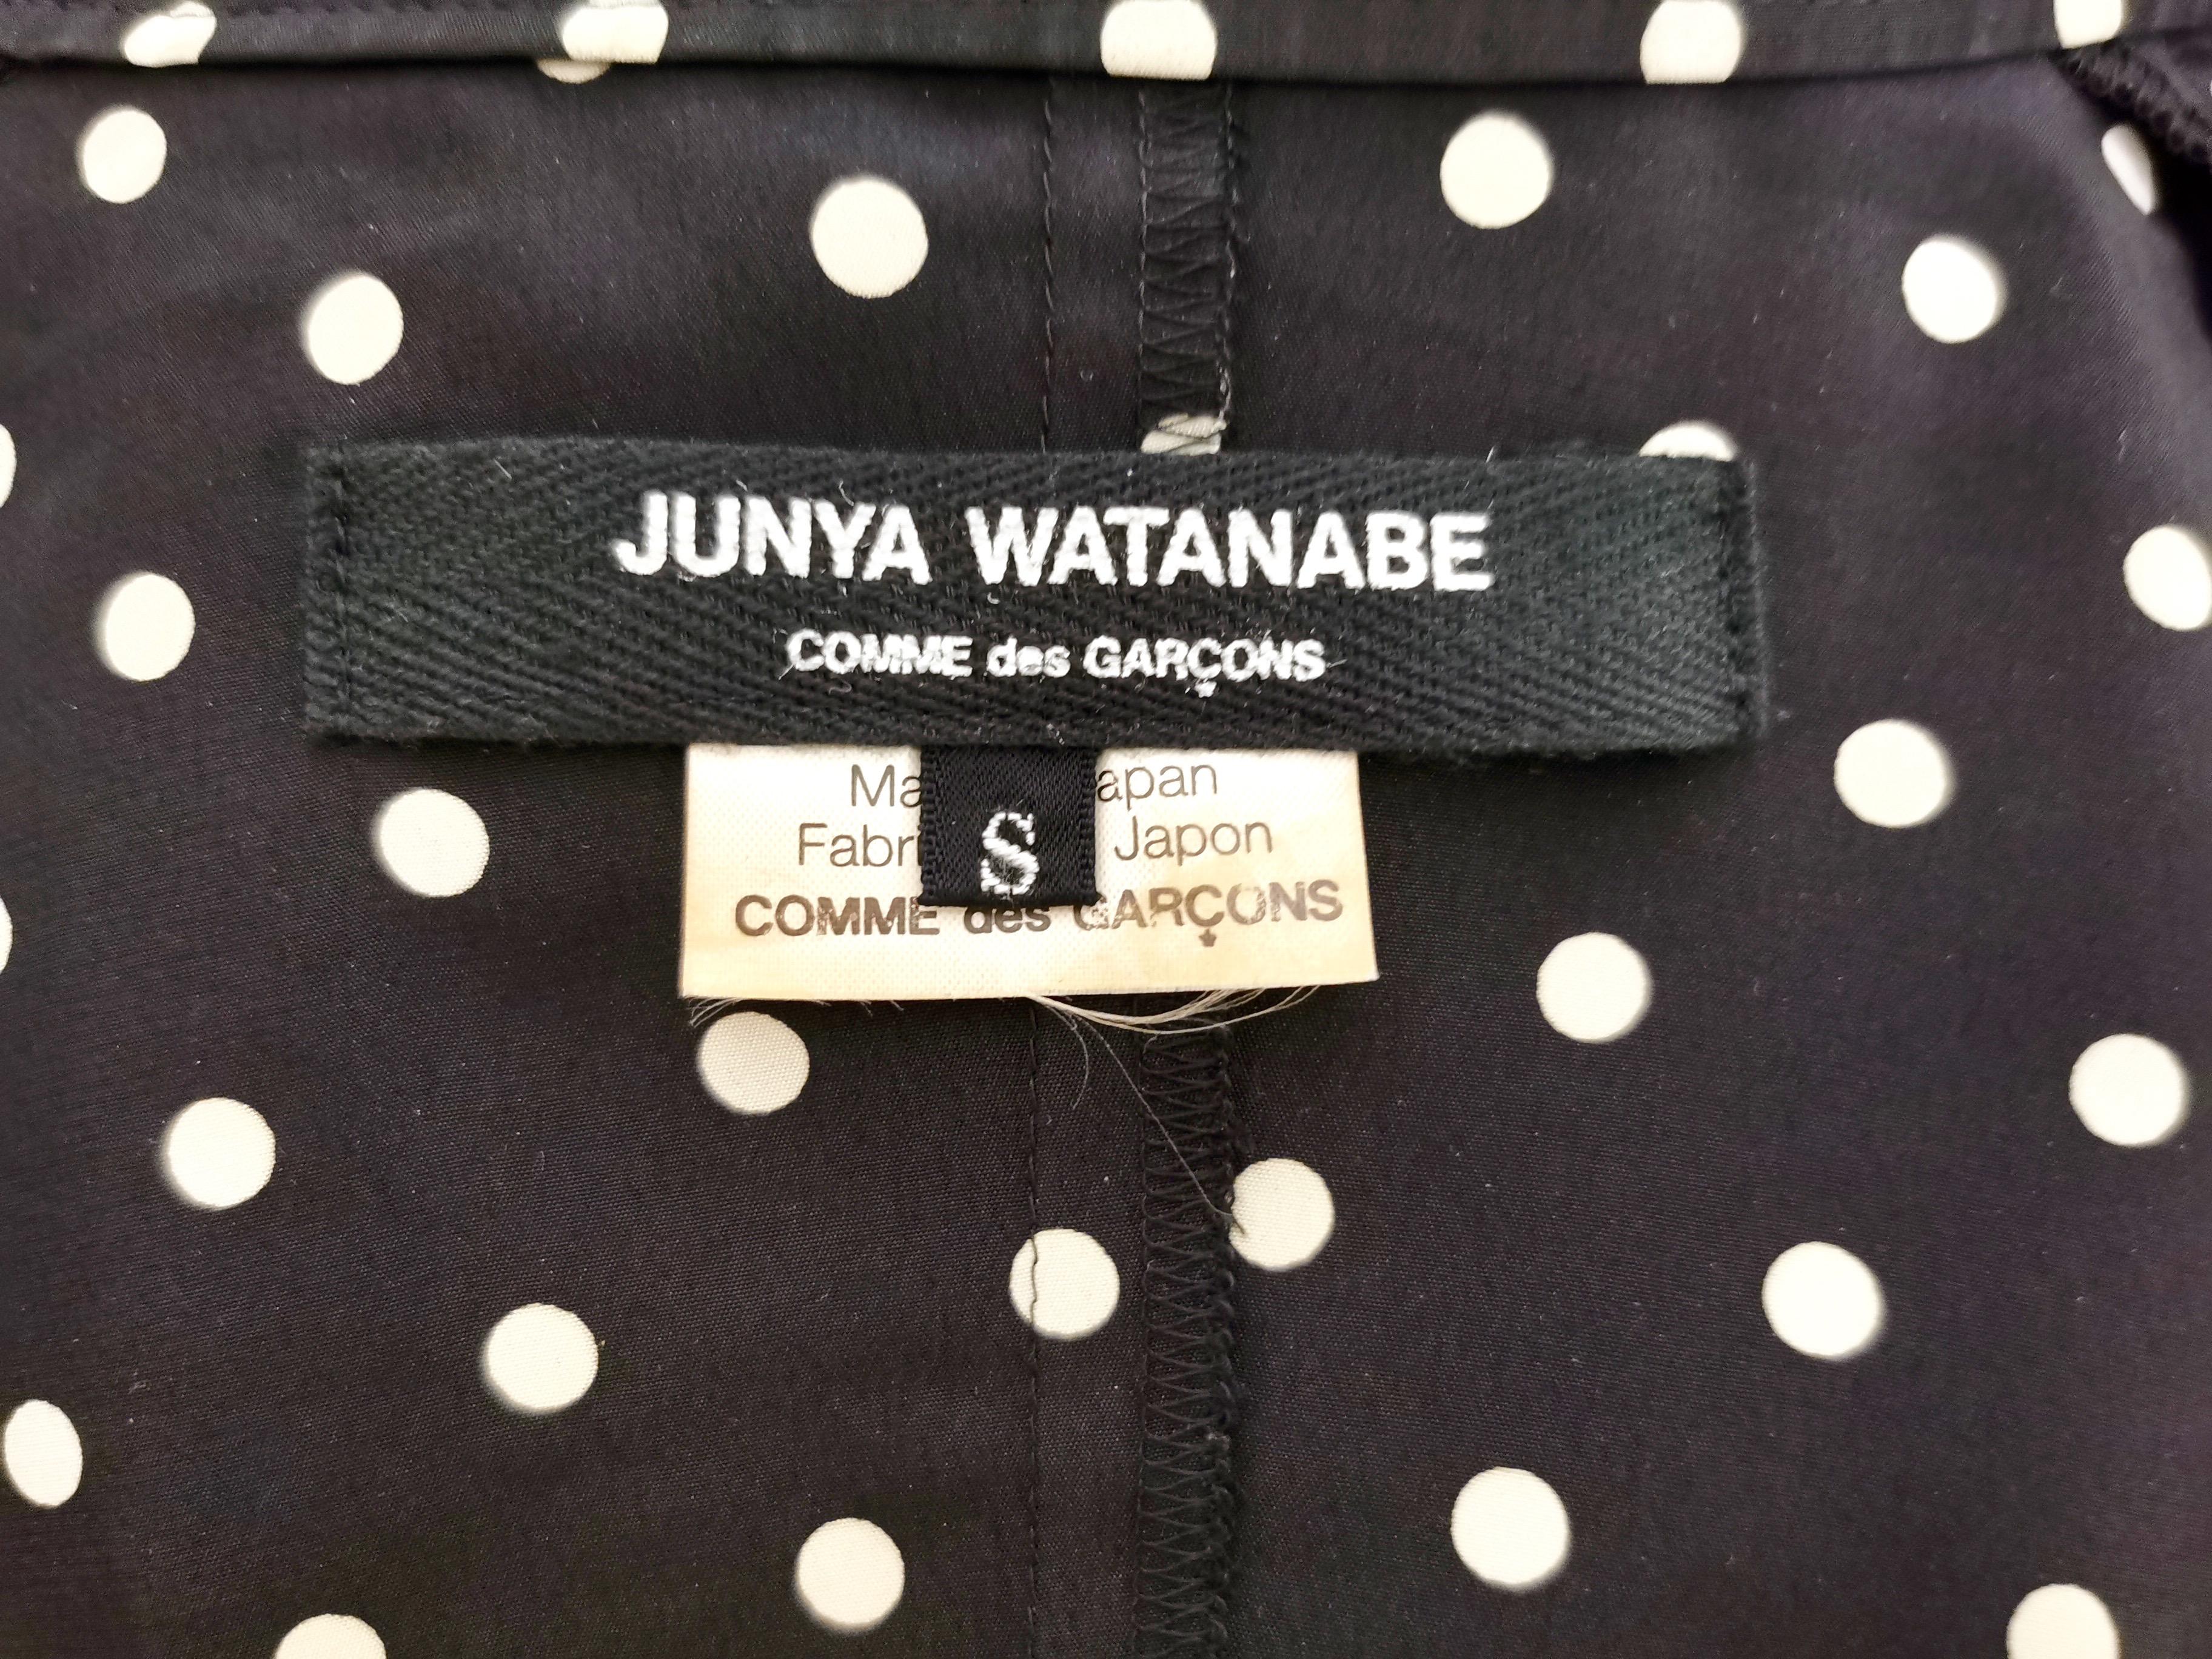 Junya Watanabe Comme des Garcons Twisted Polka Dot Cardigan Dress AD 2007 For Sale 10